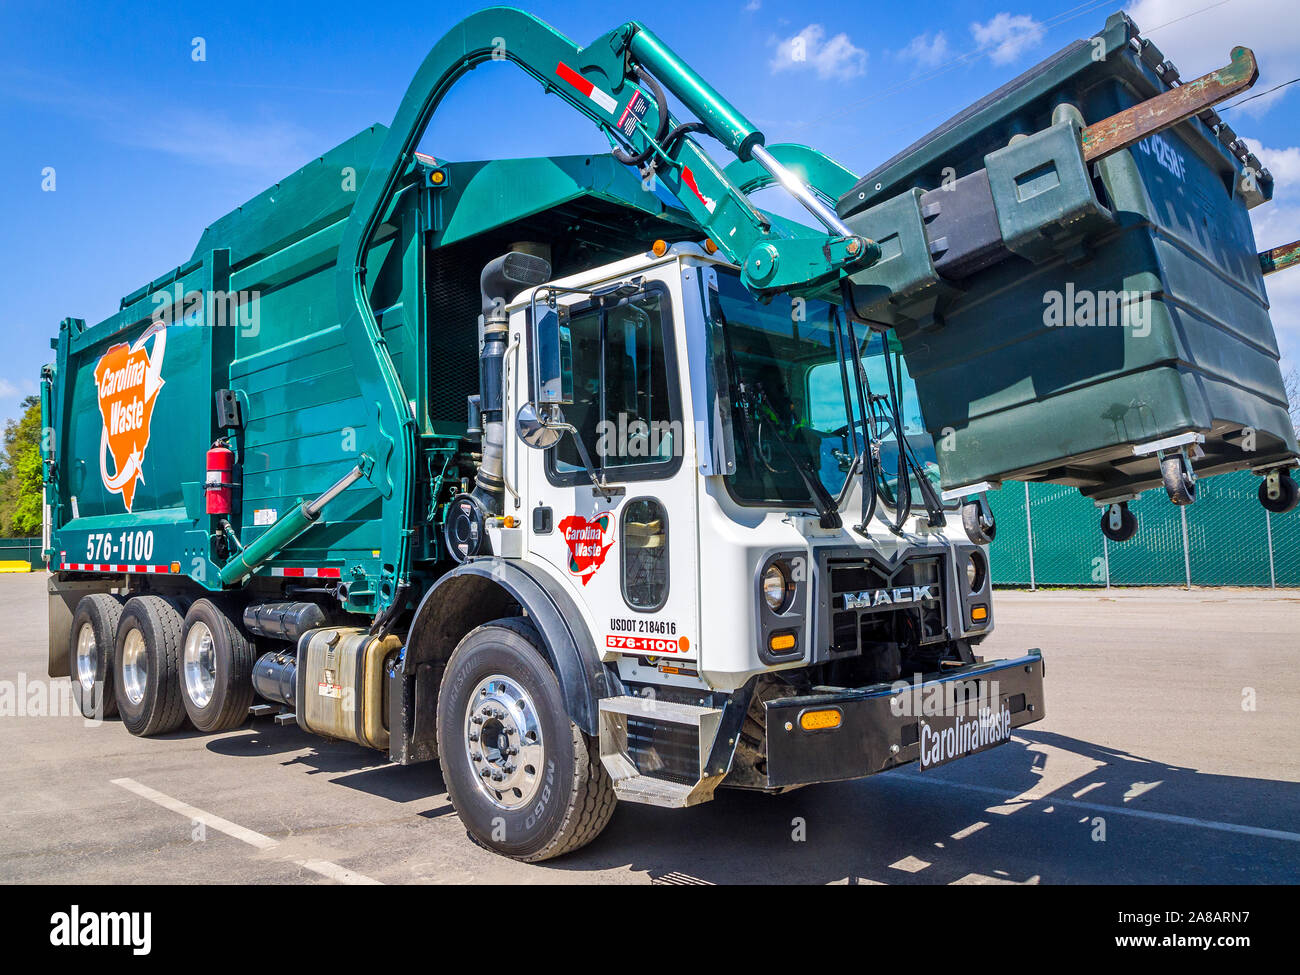 CAMION POUBELLE - GARBAGE AND RECYCLING TRUCK